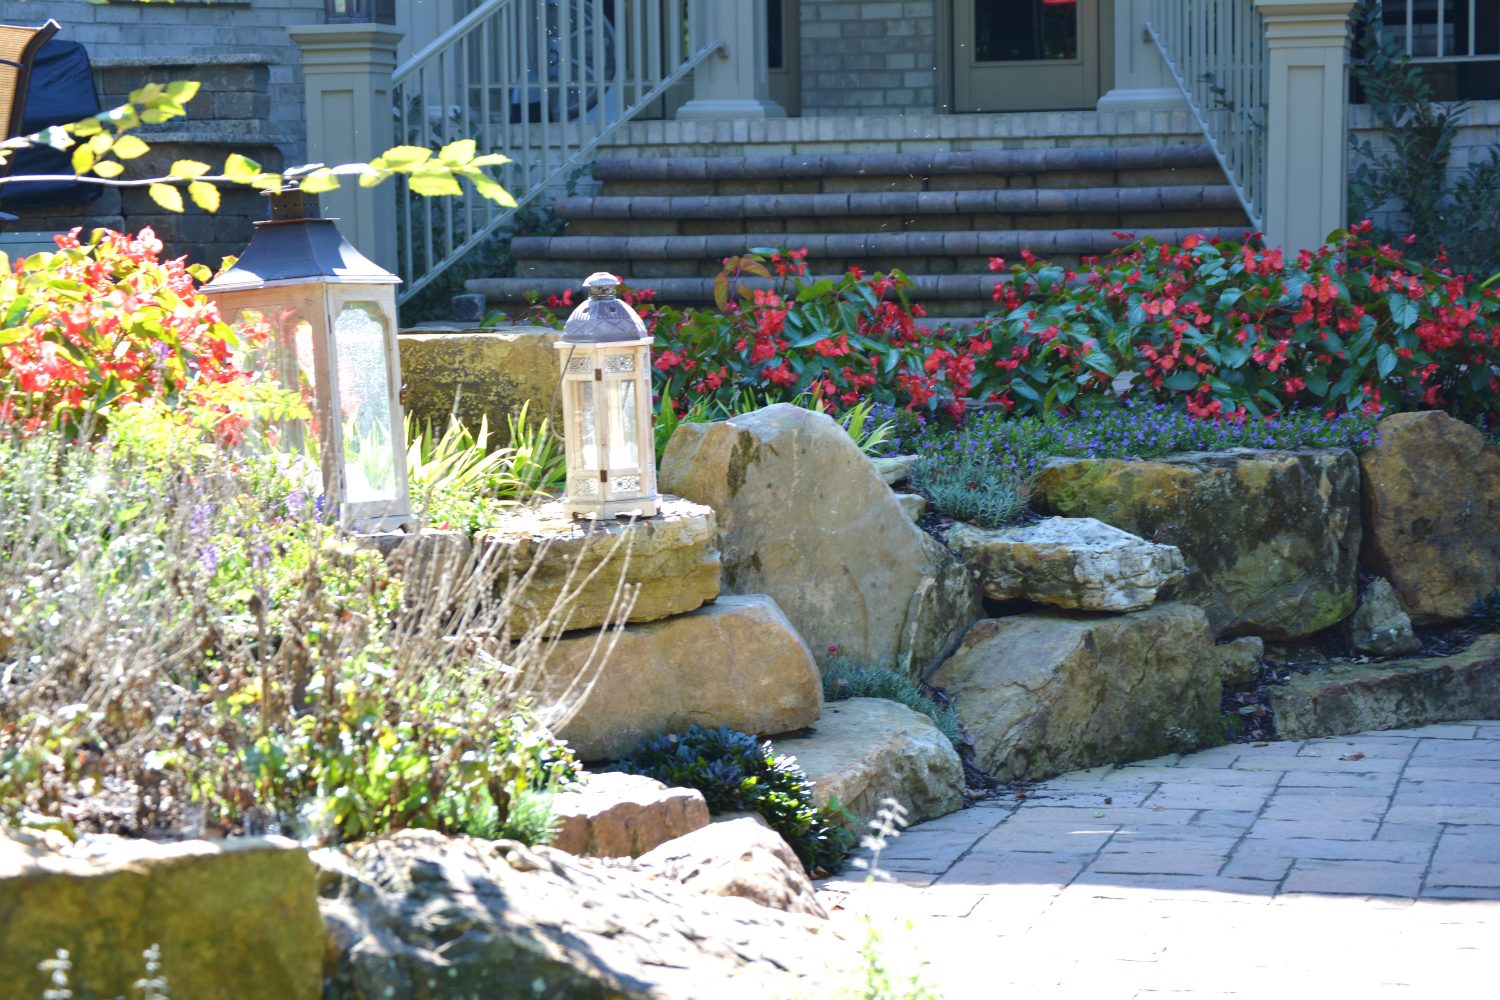 Hardscape stones and paver, surrounded by annual flowers and professional landscaping